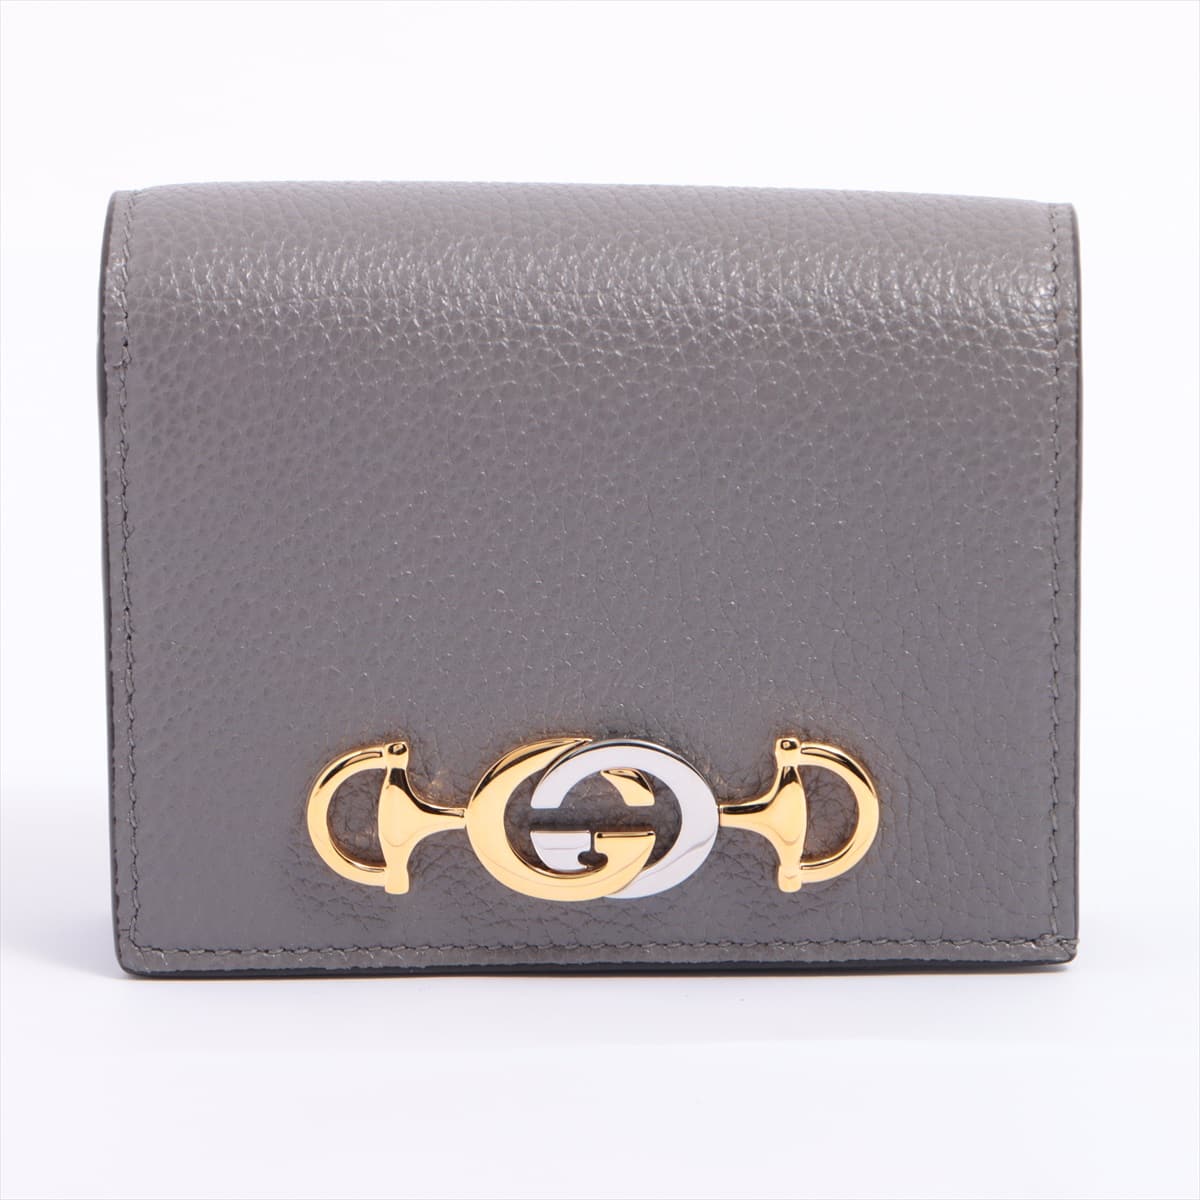 Gucci Zumi 570660 Leather Wallet Grey Comes with a chain